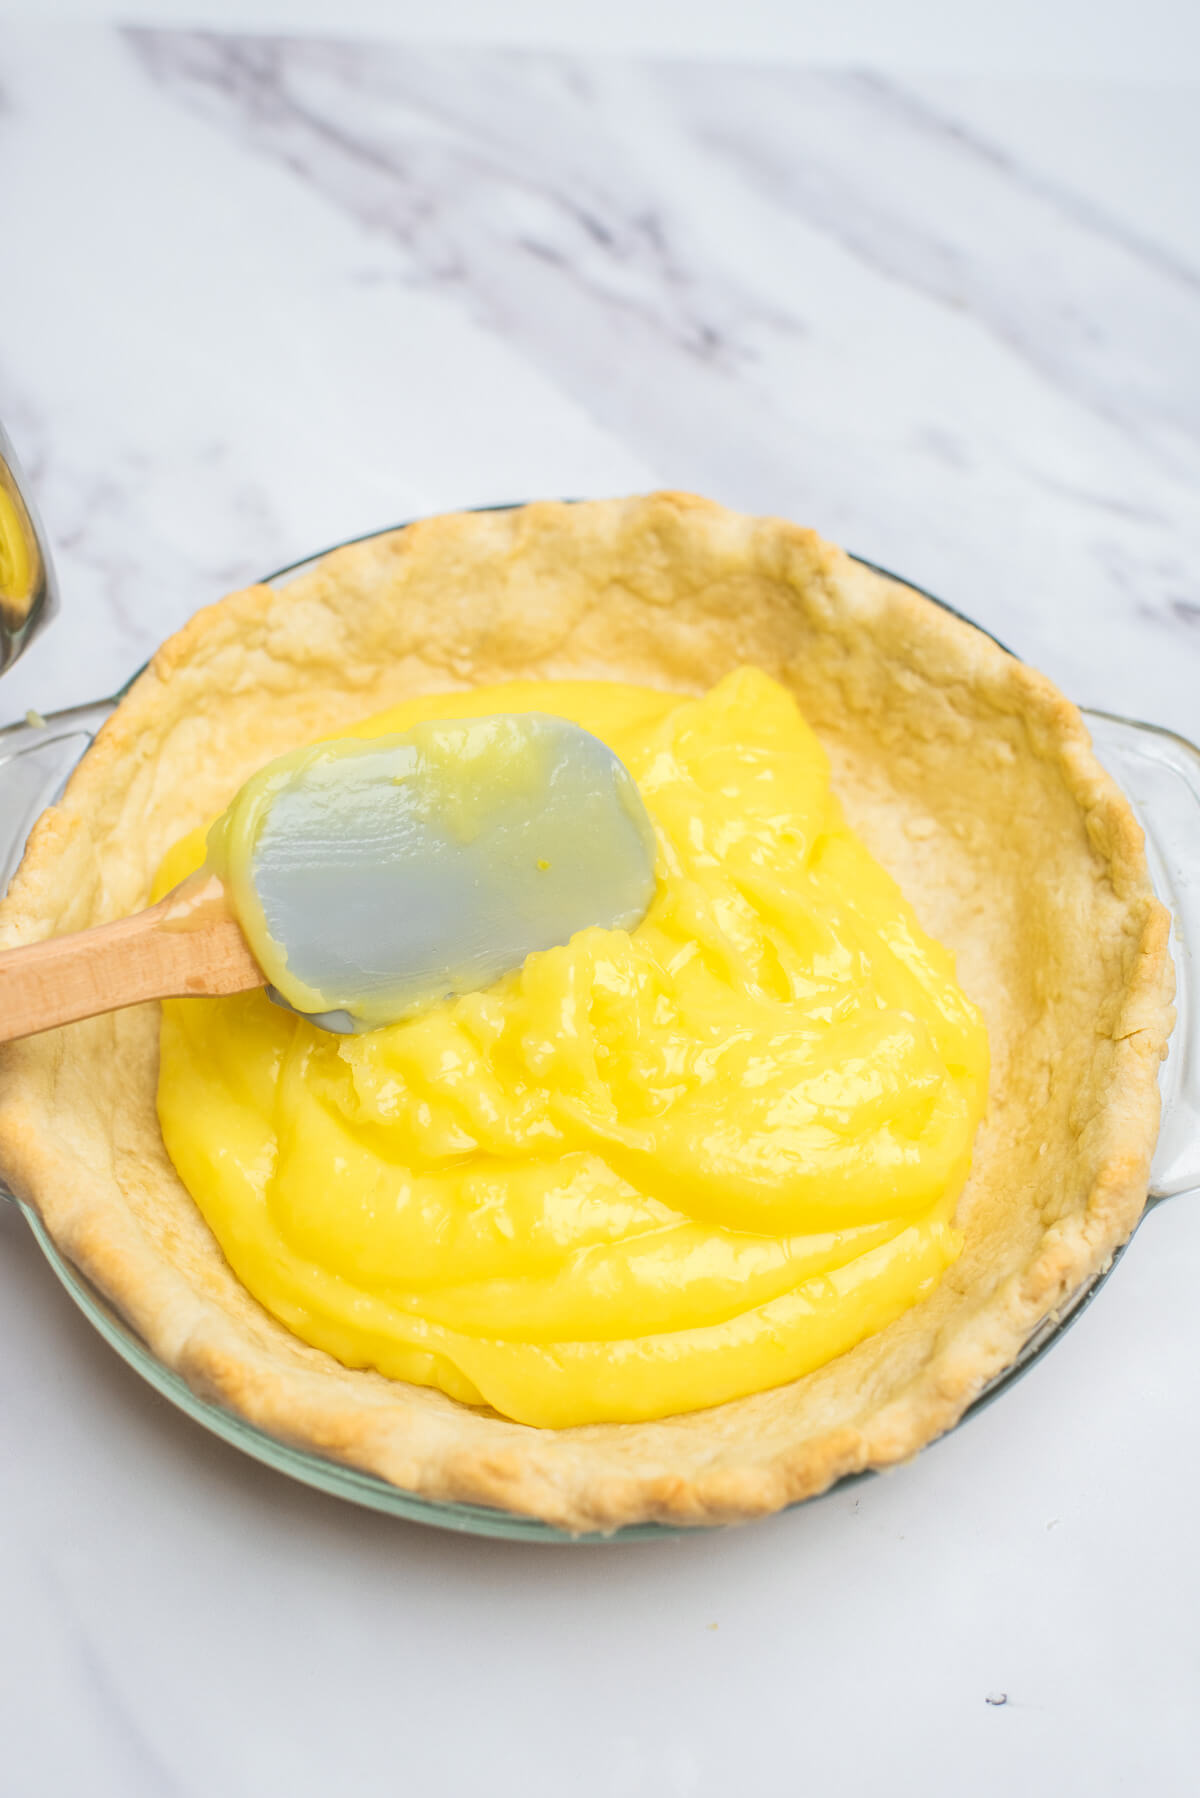 Spreading lemon pie filling in a pre baked pastry shell.